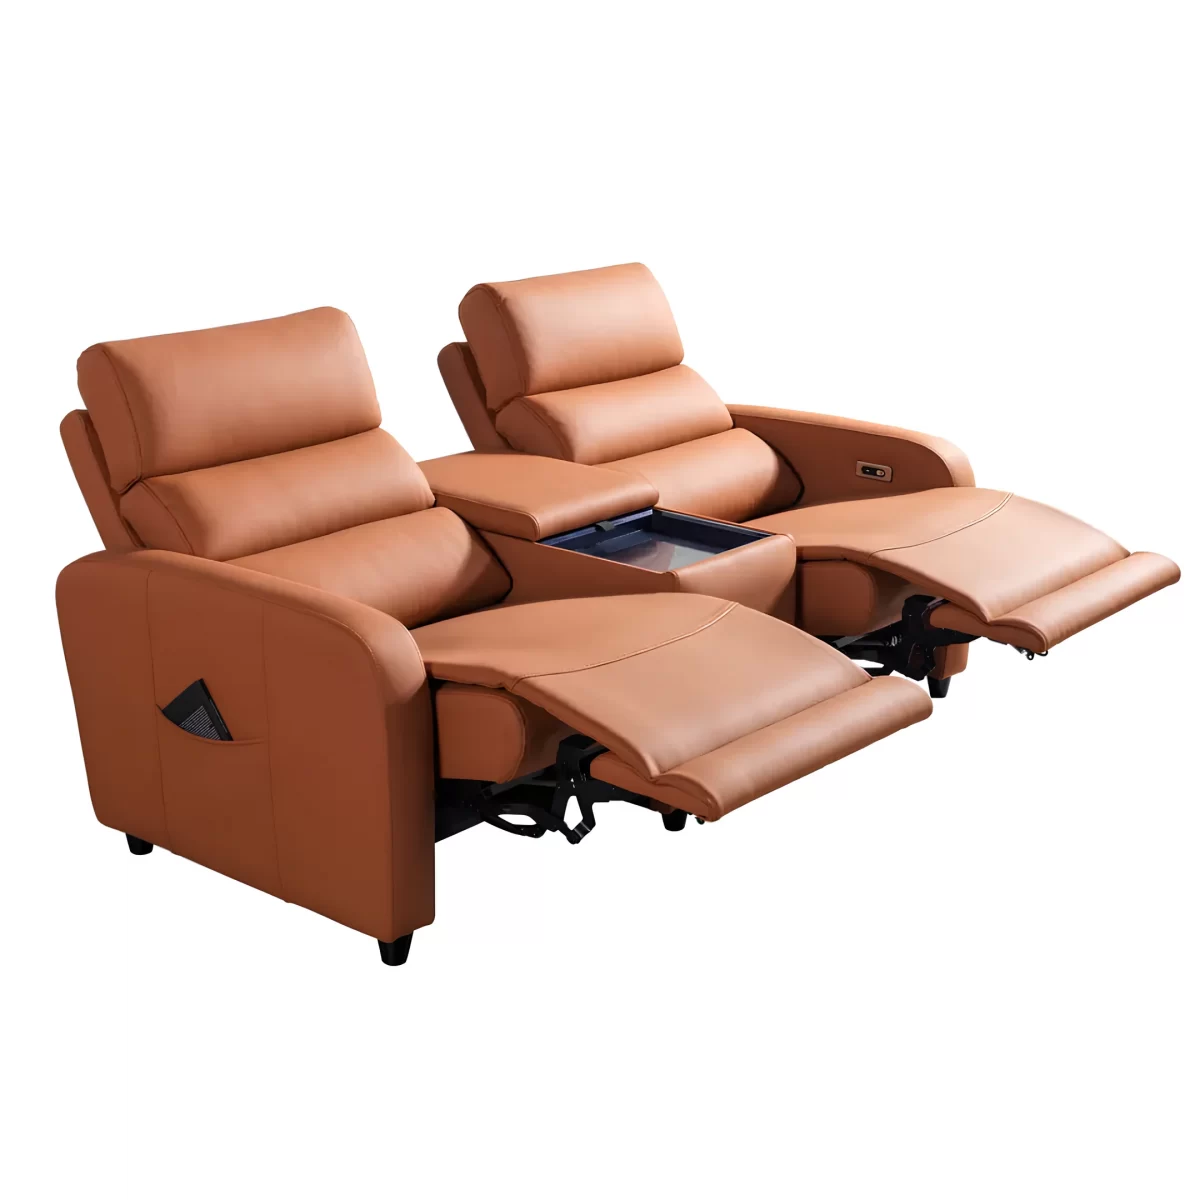 mari double reclining sofa electric recliner seat for home theater5